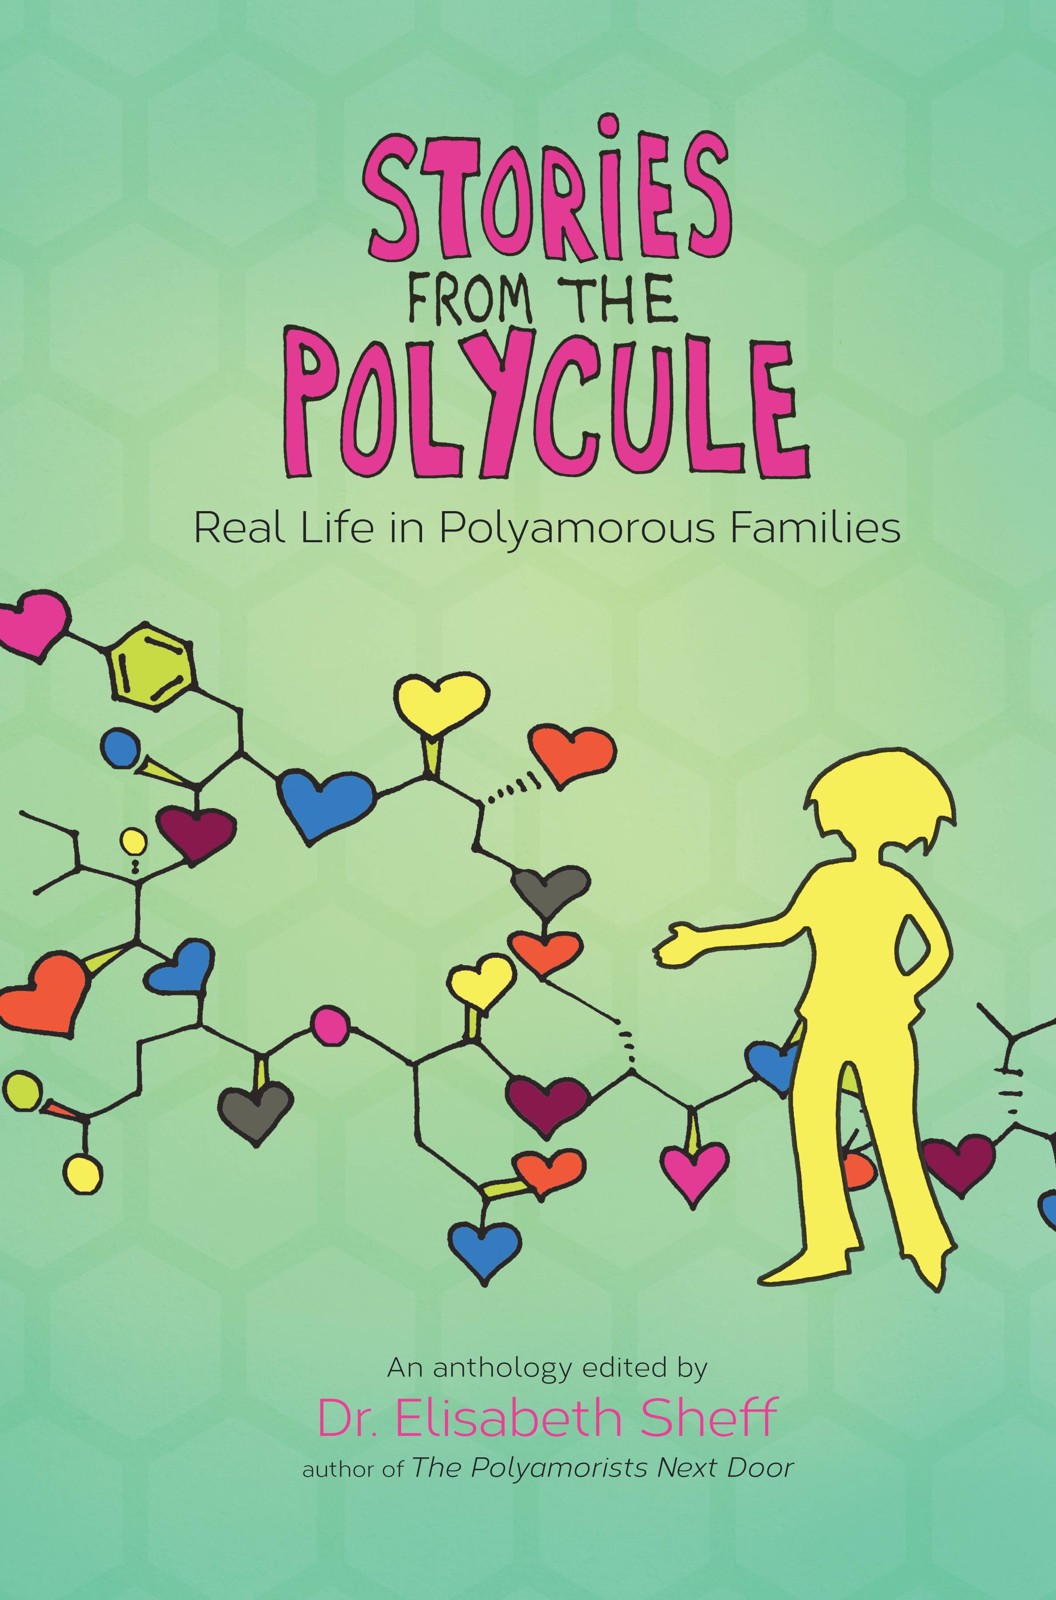 Elisabeth Sheff: Stories from the polycule (2015)